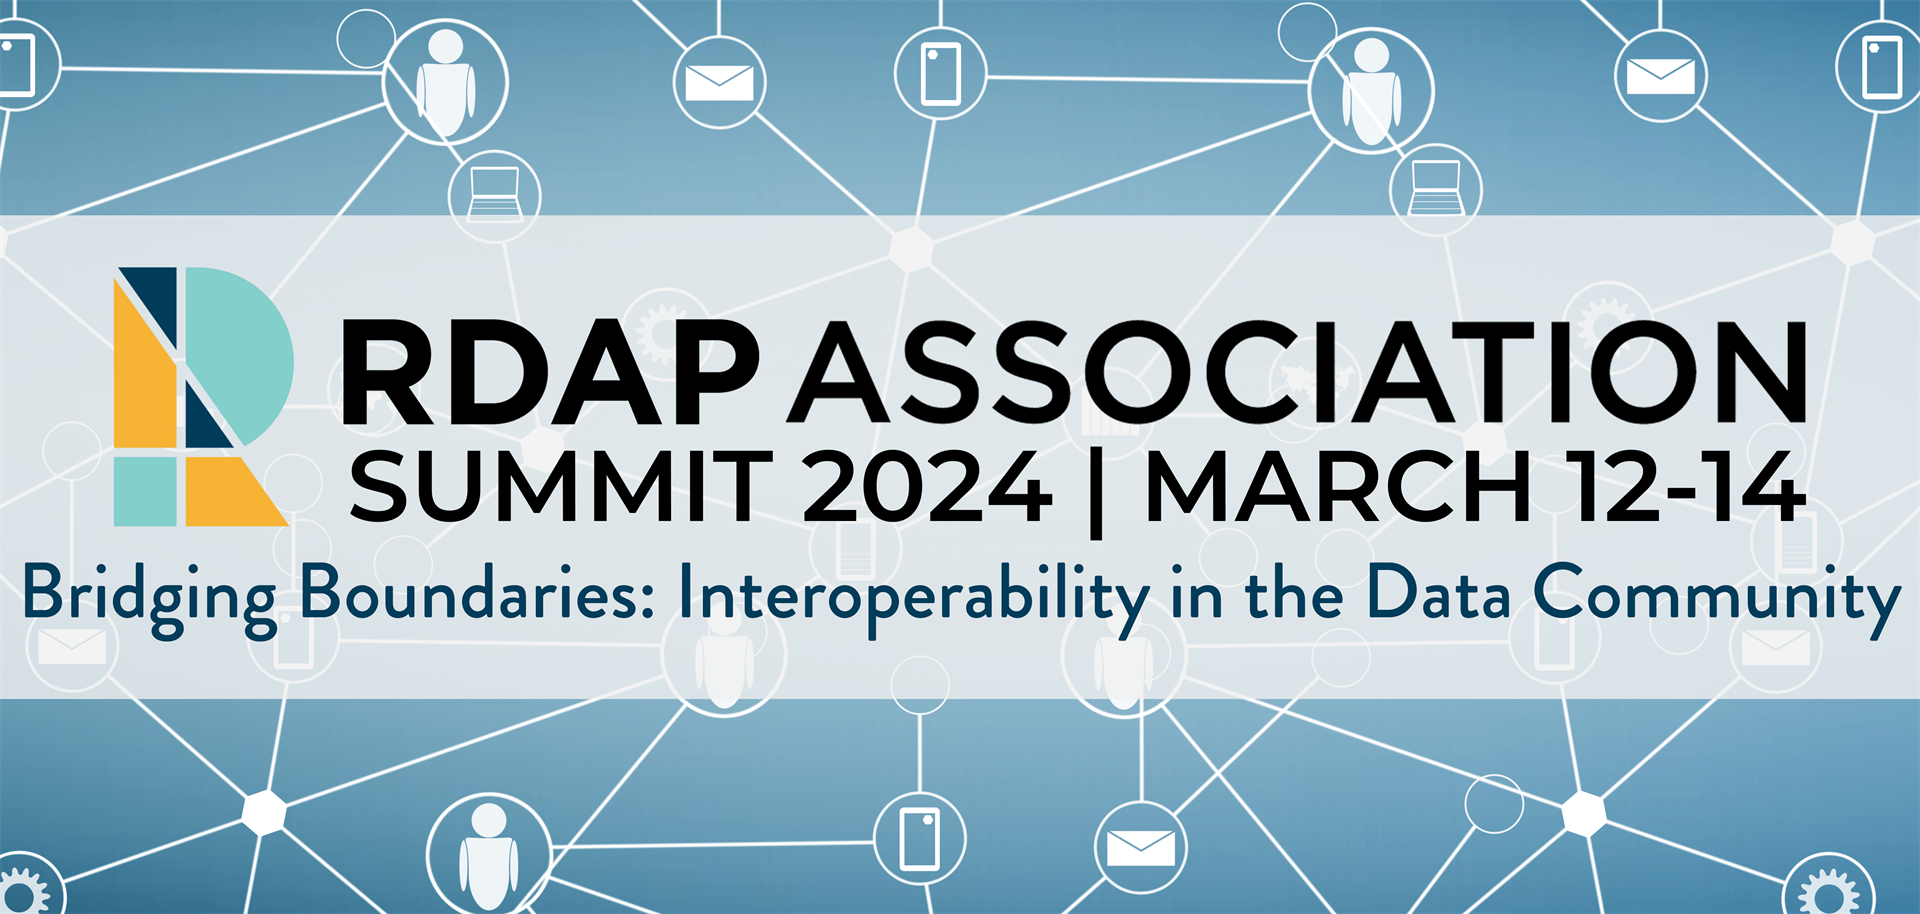 The RDAP Summit 2024 will be hosted online from March 12-14, 2024, with workshops on March 11, 2024